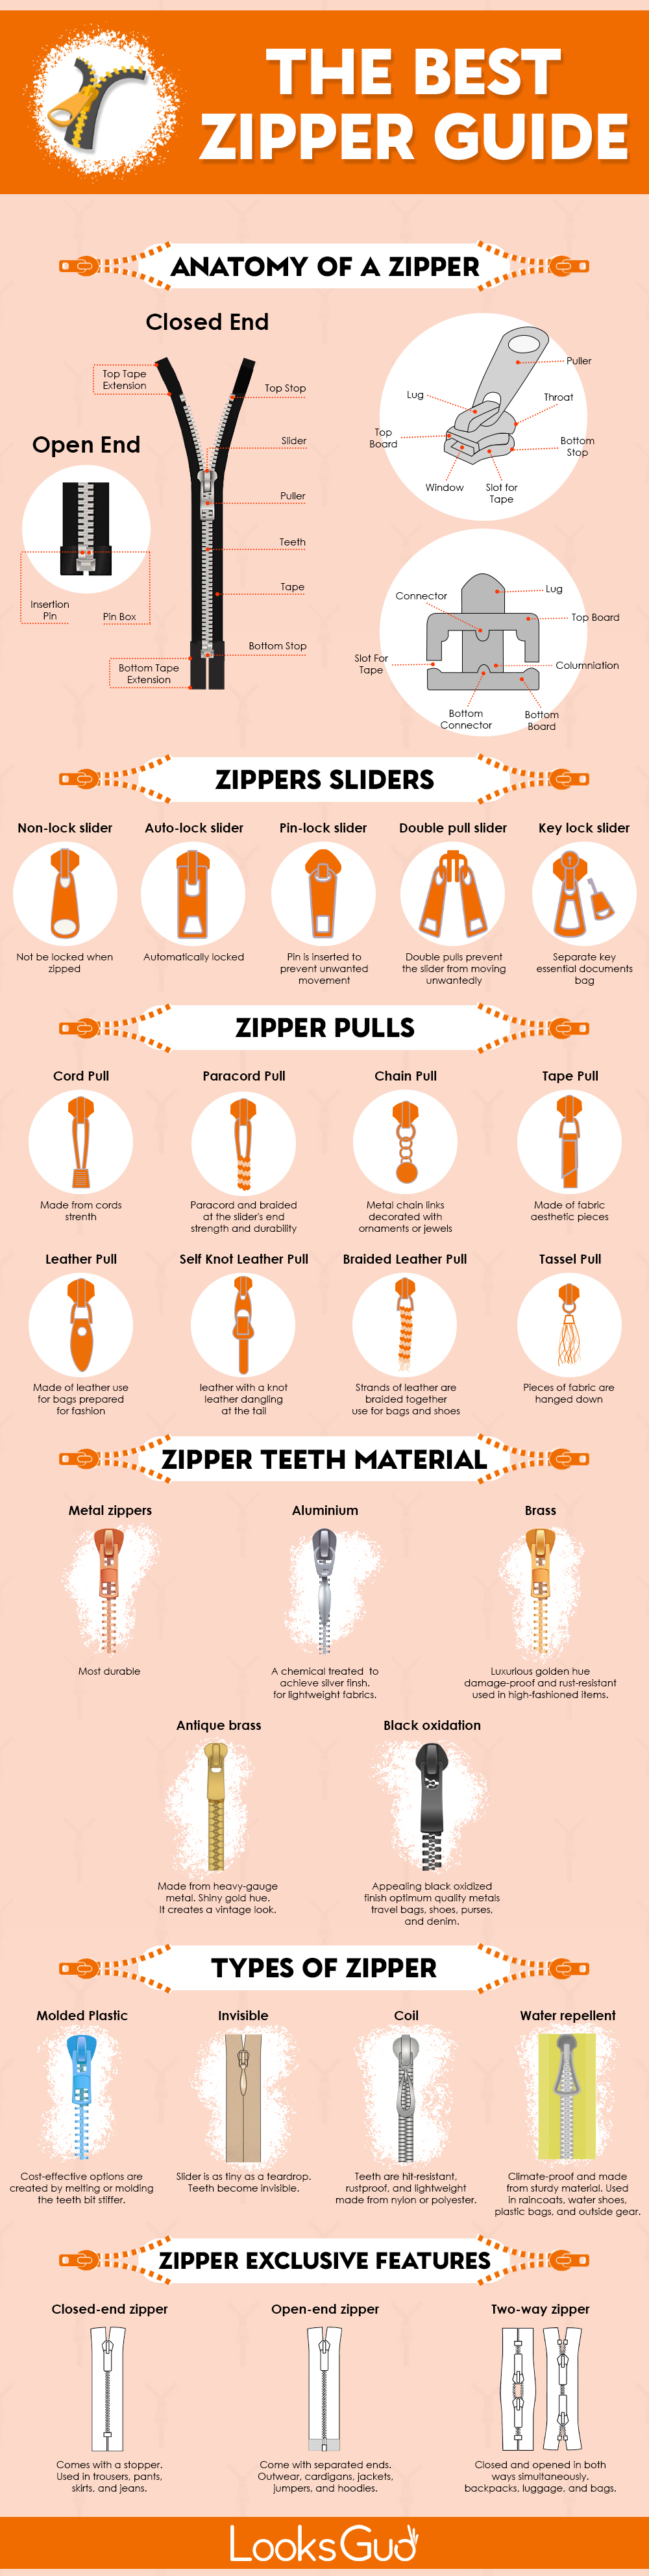 Types of zippers and methods of attachment